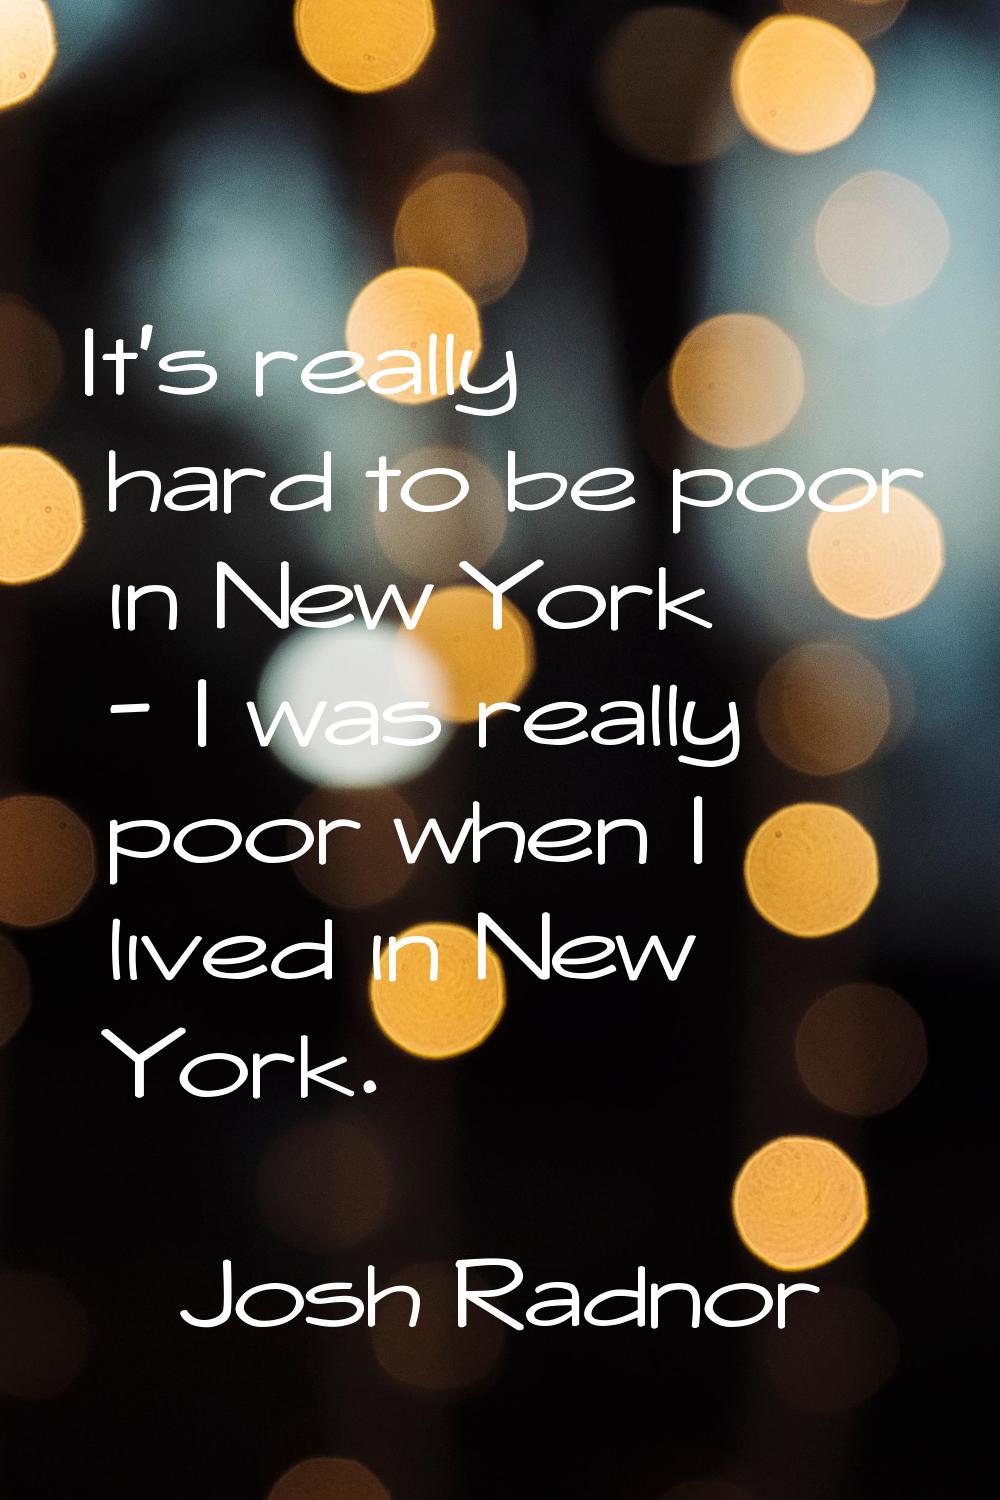 It's really hard to be poor in New York - I was really poor when I lived in New York.